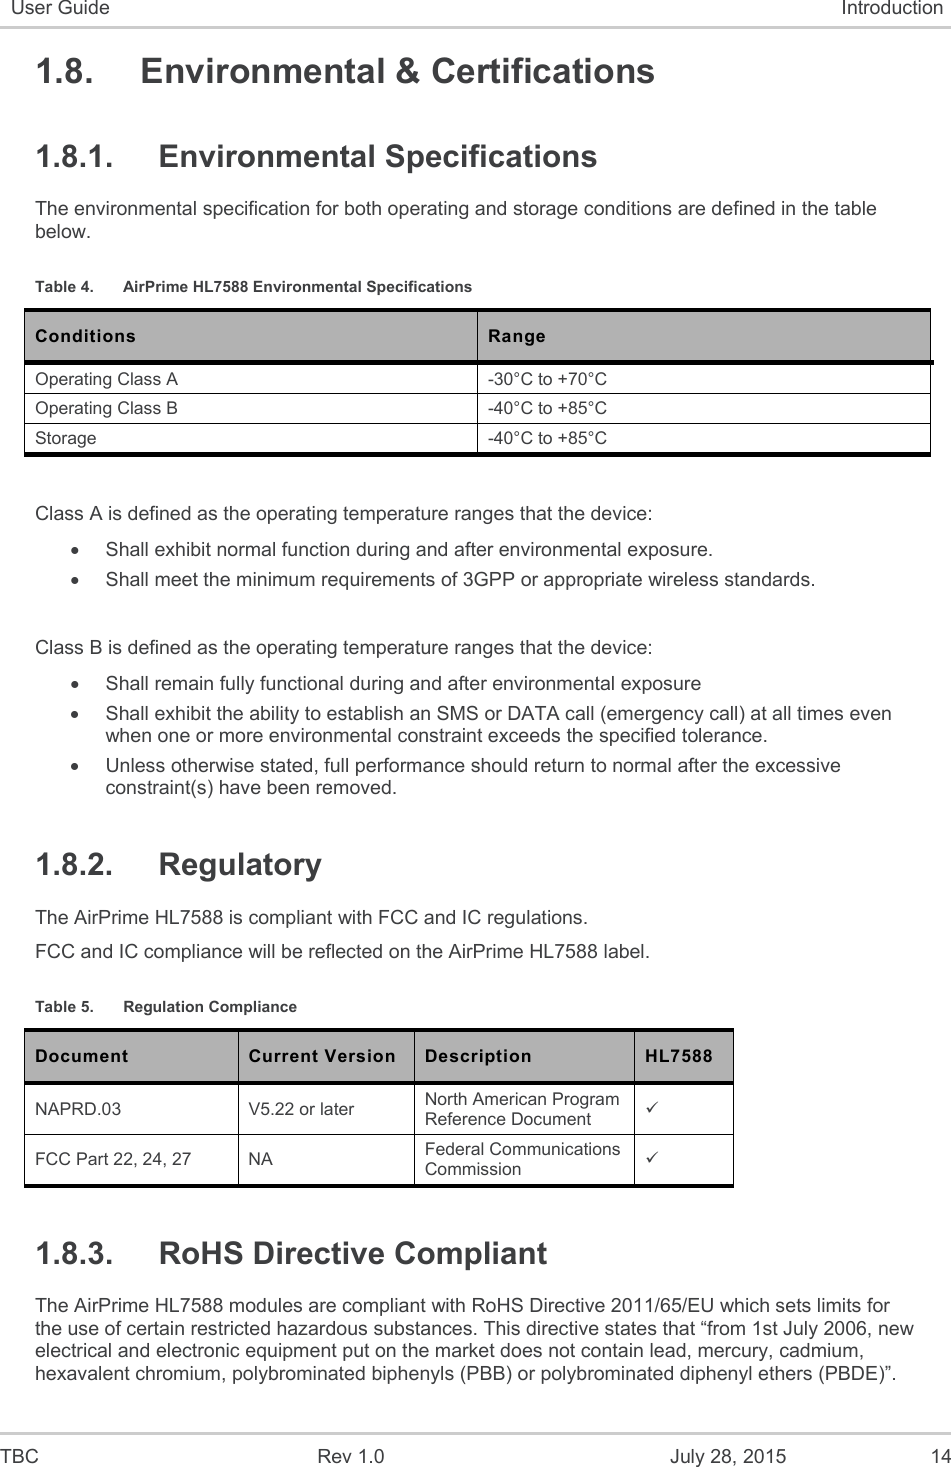  TBC  Rev 1.0  July 28, 2015  14 User Guide  Introduction 1.8.  Environmental &amp; Certifications 1.8.1.  Environmental Specifications The environmental specification for both operating and storage conditions are defined in the table below. Table 4.  AirPrime HL7588 Environmental Specifications Conditions  Range Operating Class A  -30°C to +70°C Operating Class B  -40°C to +85°C Storage  -40°C to +85°C  Class A is defined as the operating temperature ranges that the device:    Shall exhibit normal function during and after environmental exposure.    Shall meet the minimum requirements of 3GPP or appropriate wireless standards.   Class B is defined as the operating temperature ranges that the device:     Shall remain fully functional during and after environmental exposure    Shall exhibit the ability to establish an SMS or DATA call (emergency call) at all times even when one or more environmental constraint exceeds the specified tolerance.    Unless otherwise stated, full performance should return to normal after the excessive constraint(s) have been removed. 1.8.2.  Regulatory The AirPrime HL7588 is compliant with FCC and IC regulations. FCC and IC compliance will be reflected on the AirPrime HL7588 label. Table 5.  Regulation Compliance Document  Current Version  Description  HL7588 NAPRD.03  V5.22 or later   North American Program Reference Document   FCC Part 22, 24, 27  NA  Federal Communications Commission    1.8.3.  RoHS Directive Compliant The AirPrime HL7588 modules are compliant with RoHS Directive 2011/65/EU which sets limits for the use of certain restricted hazardous substances. This directive states that “from 1st July 2006, new electrical and electronic equipment put on the market does not contain lead, mercury, cadmium, hexavalent chromium, polybrominated biphenyls (PBB) or polybrominated diphenyl ethers (PBDE)”. 